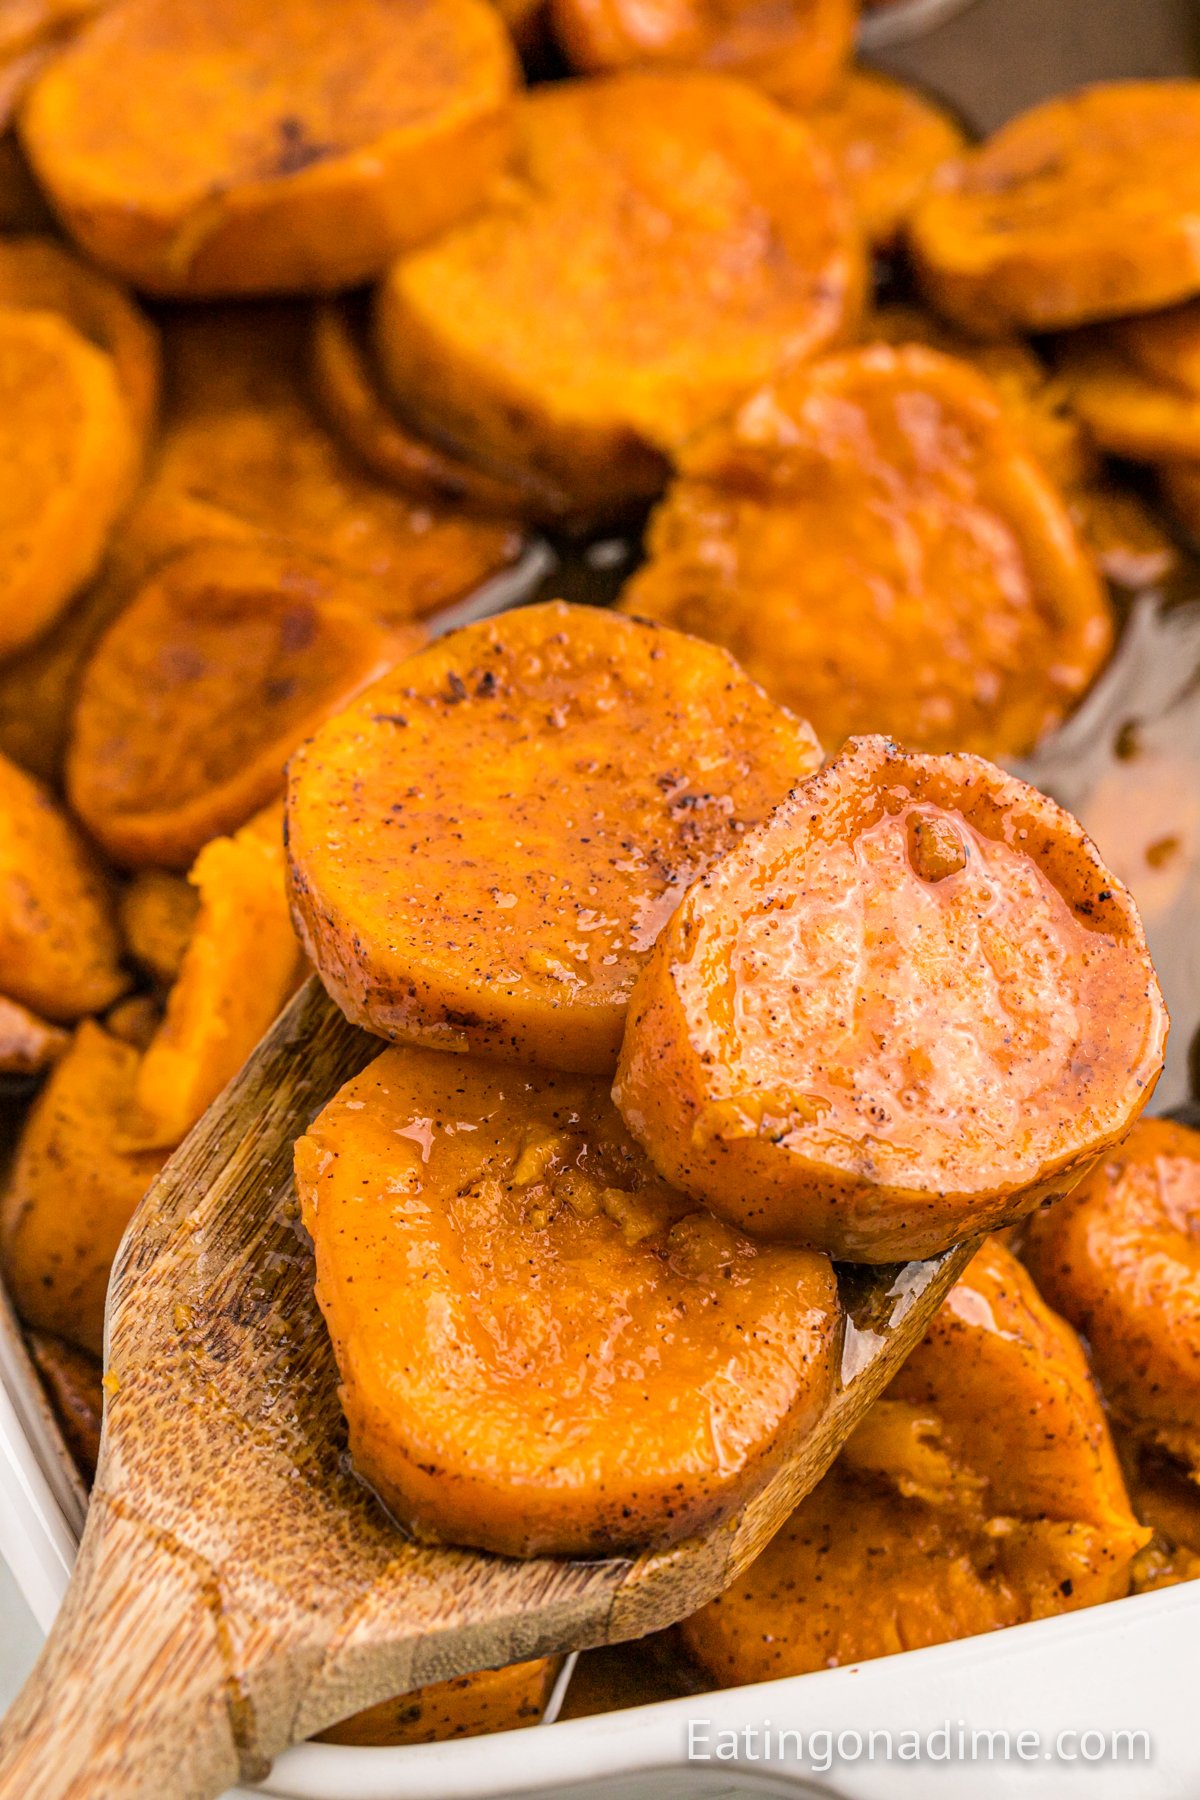 Candied sweet potatoes in a baking dish with a wooden spoon